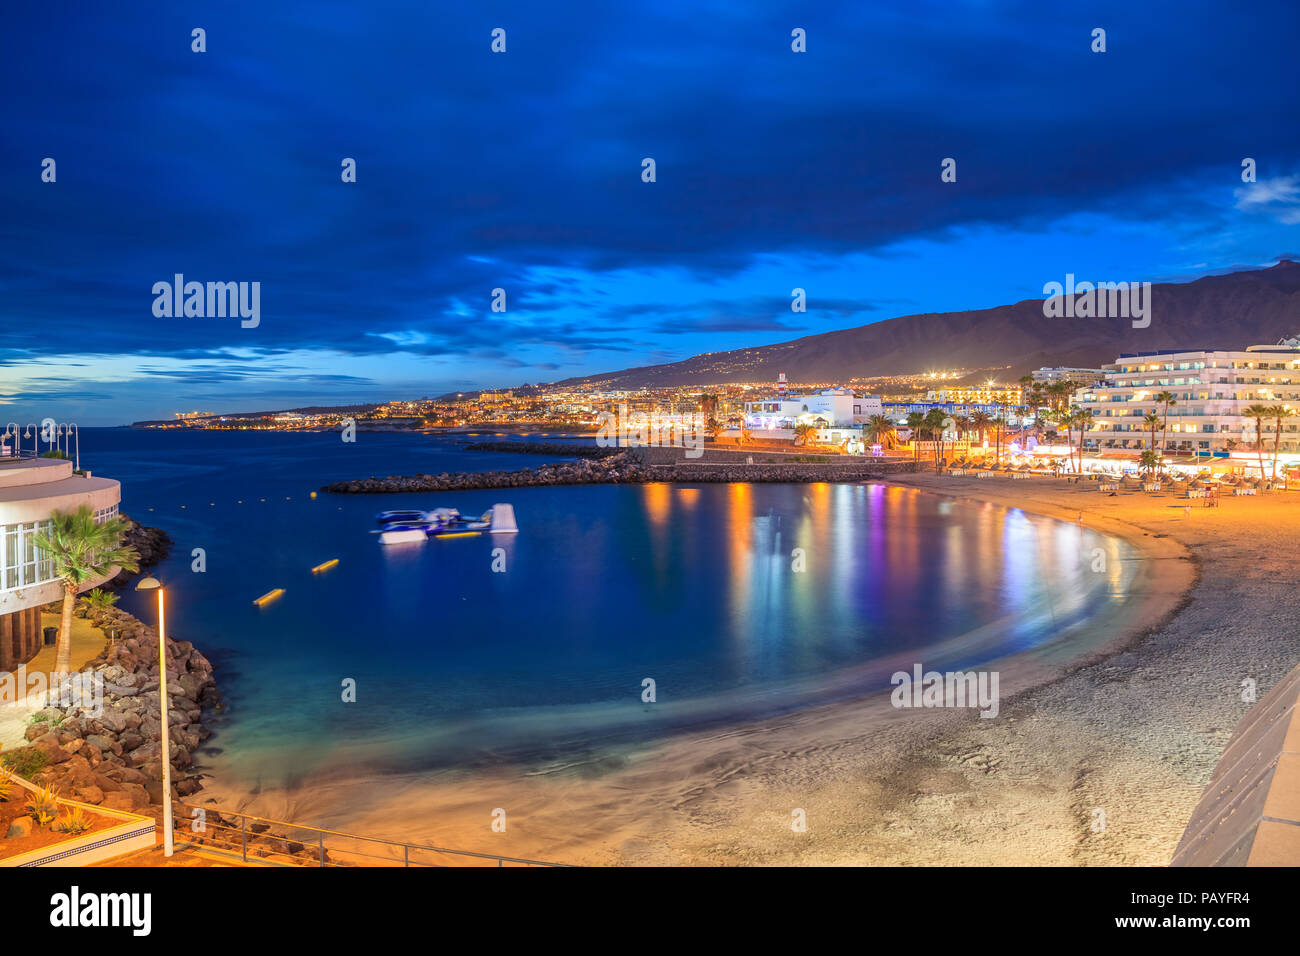 Beautiful night scene over Pinta beach with colorful lights reflected in the sea in Tenerife, Canary island, Spain Stock Photo